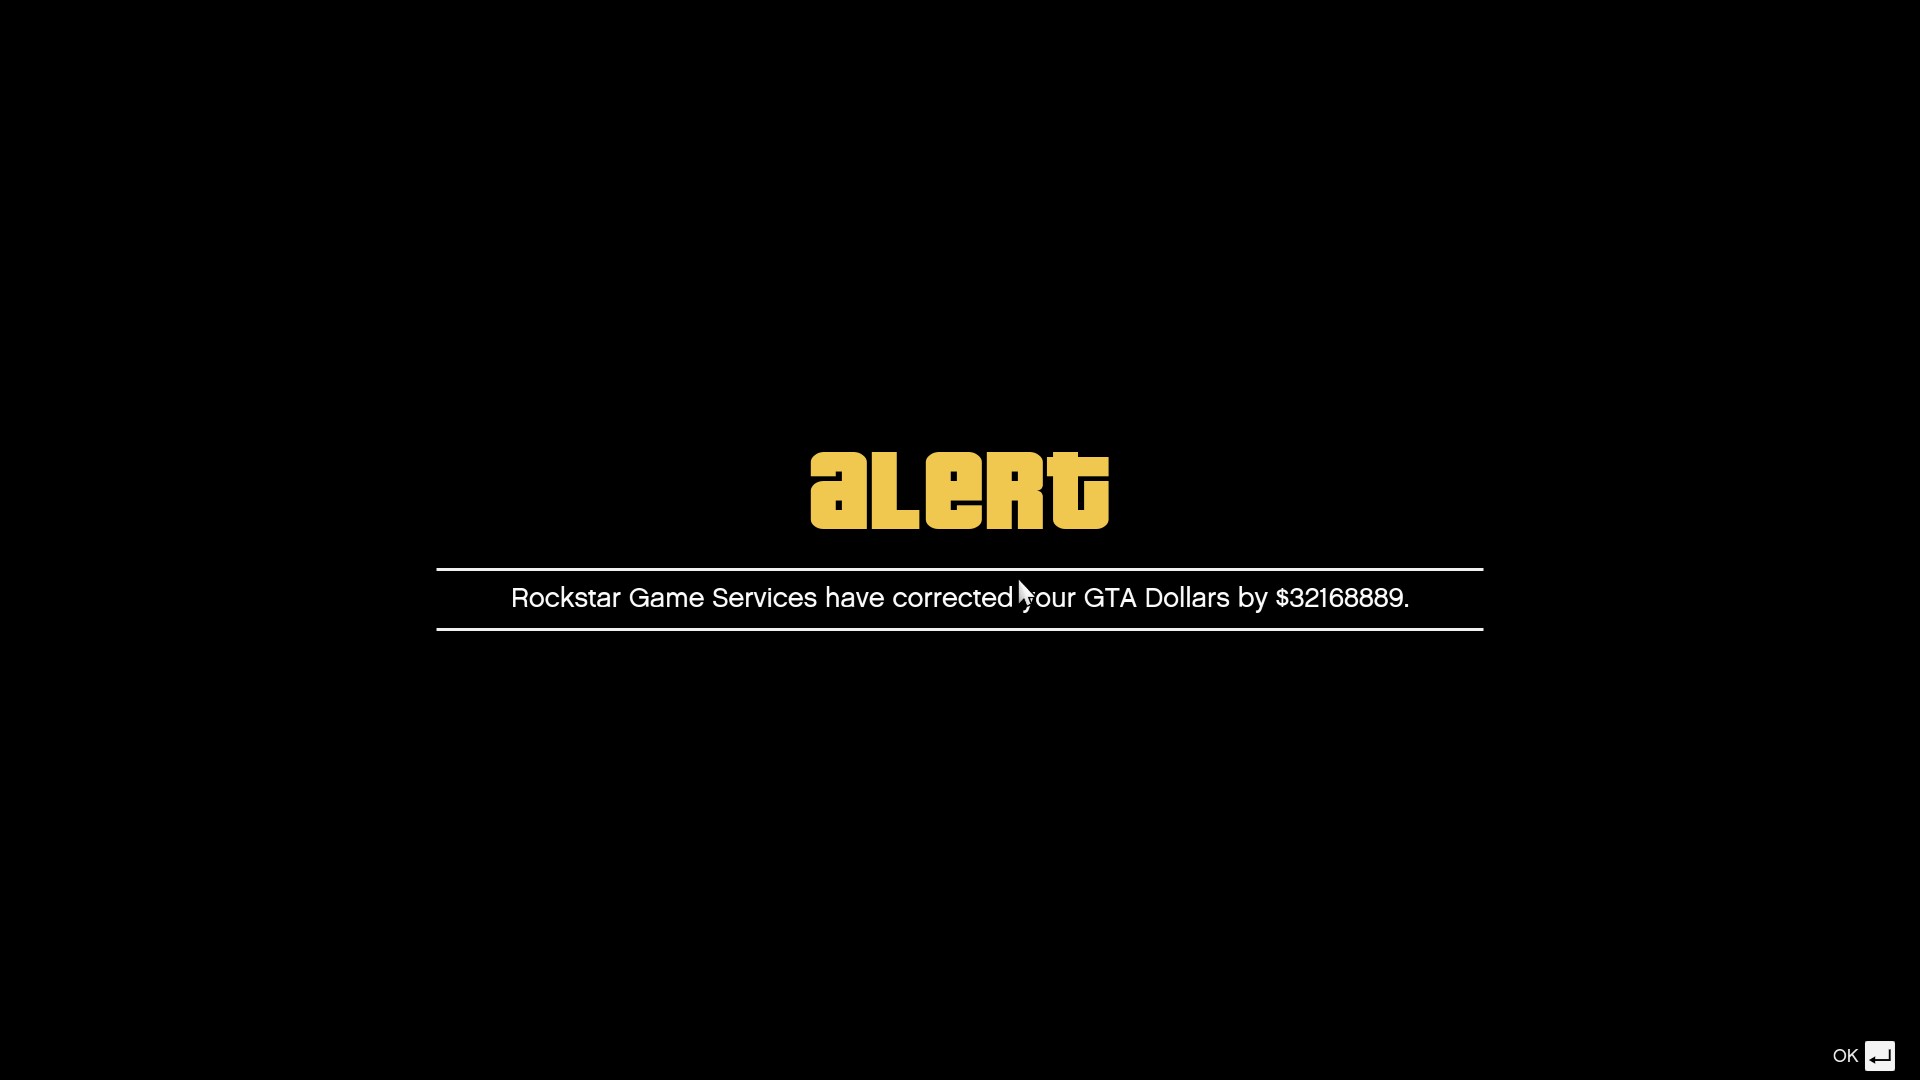 GTA 5 player asks Rockstar for $75k refund, gets $32 million instead: An image displaying a message in multiplayer sandbox game GTA Online